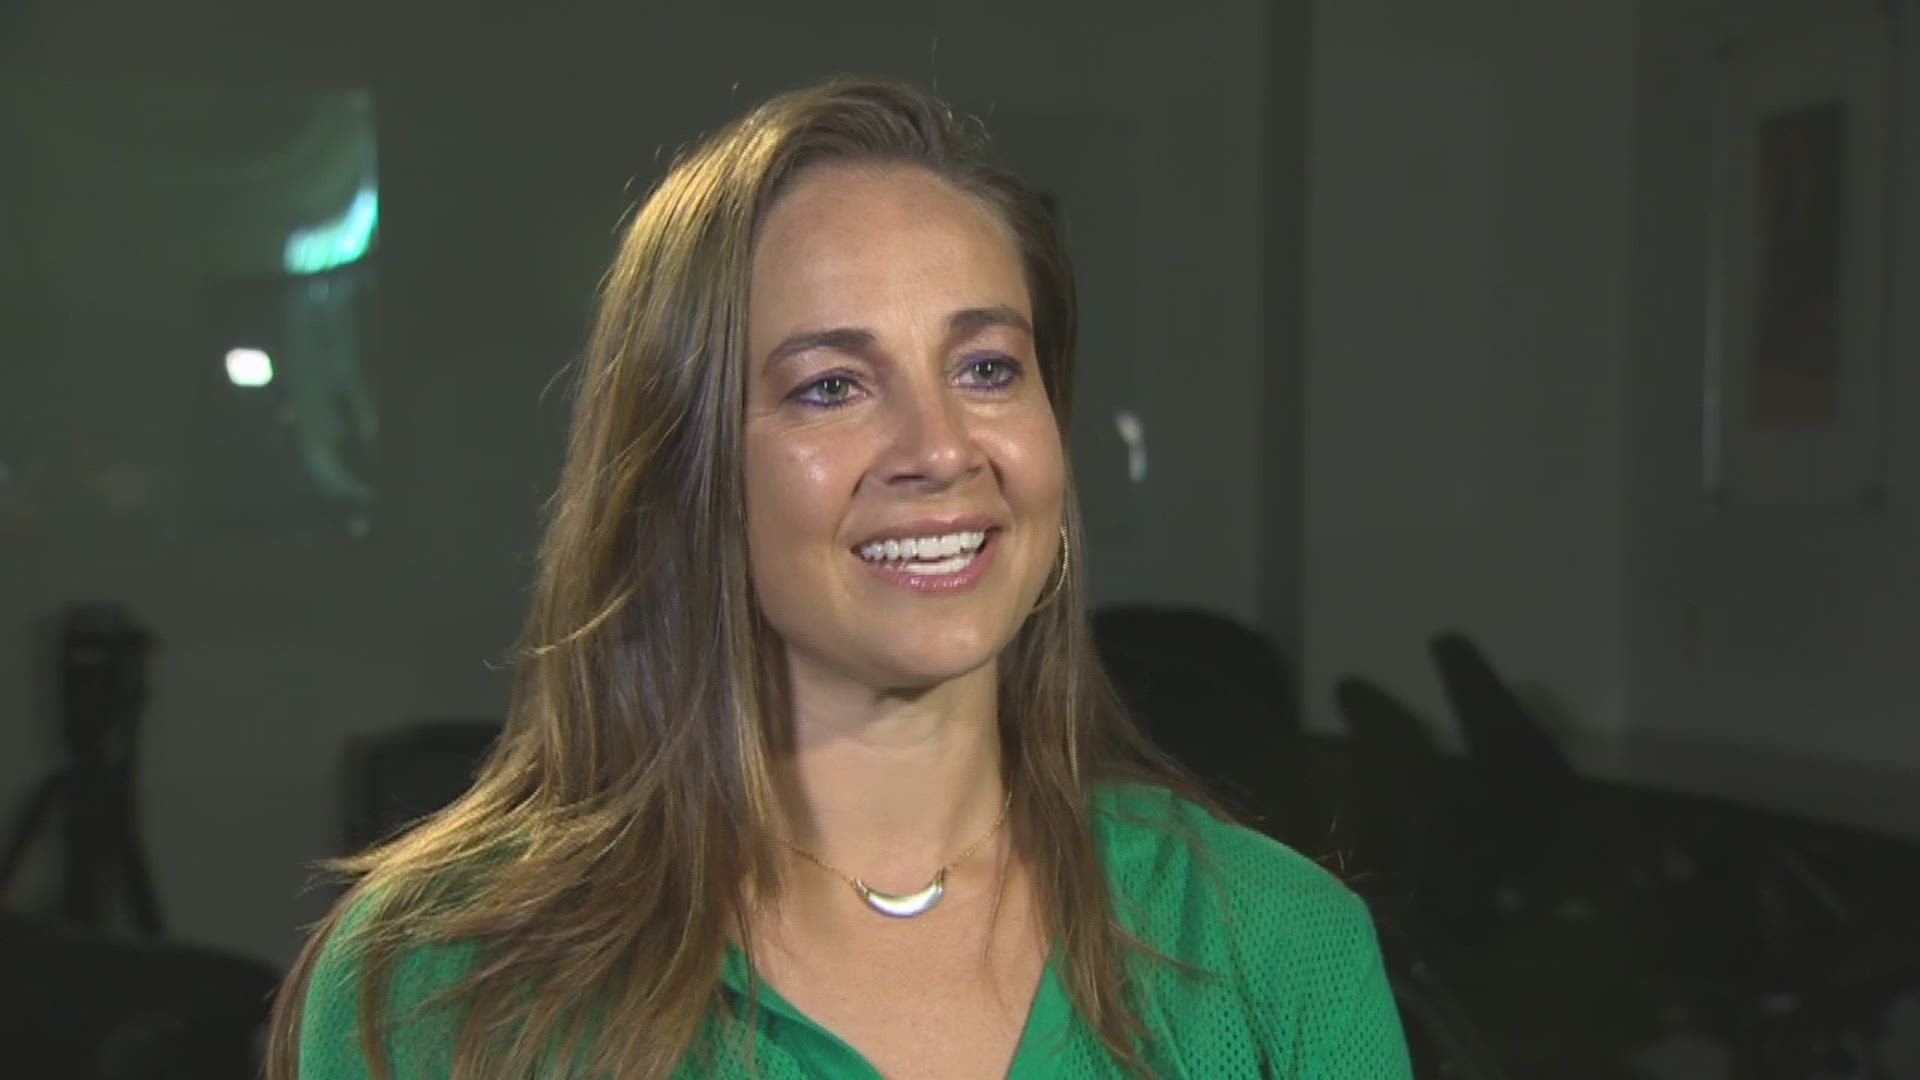 One on one interview with Becky Hammon